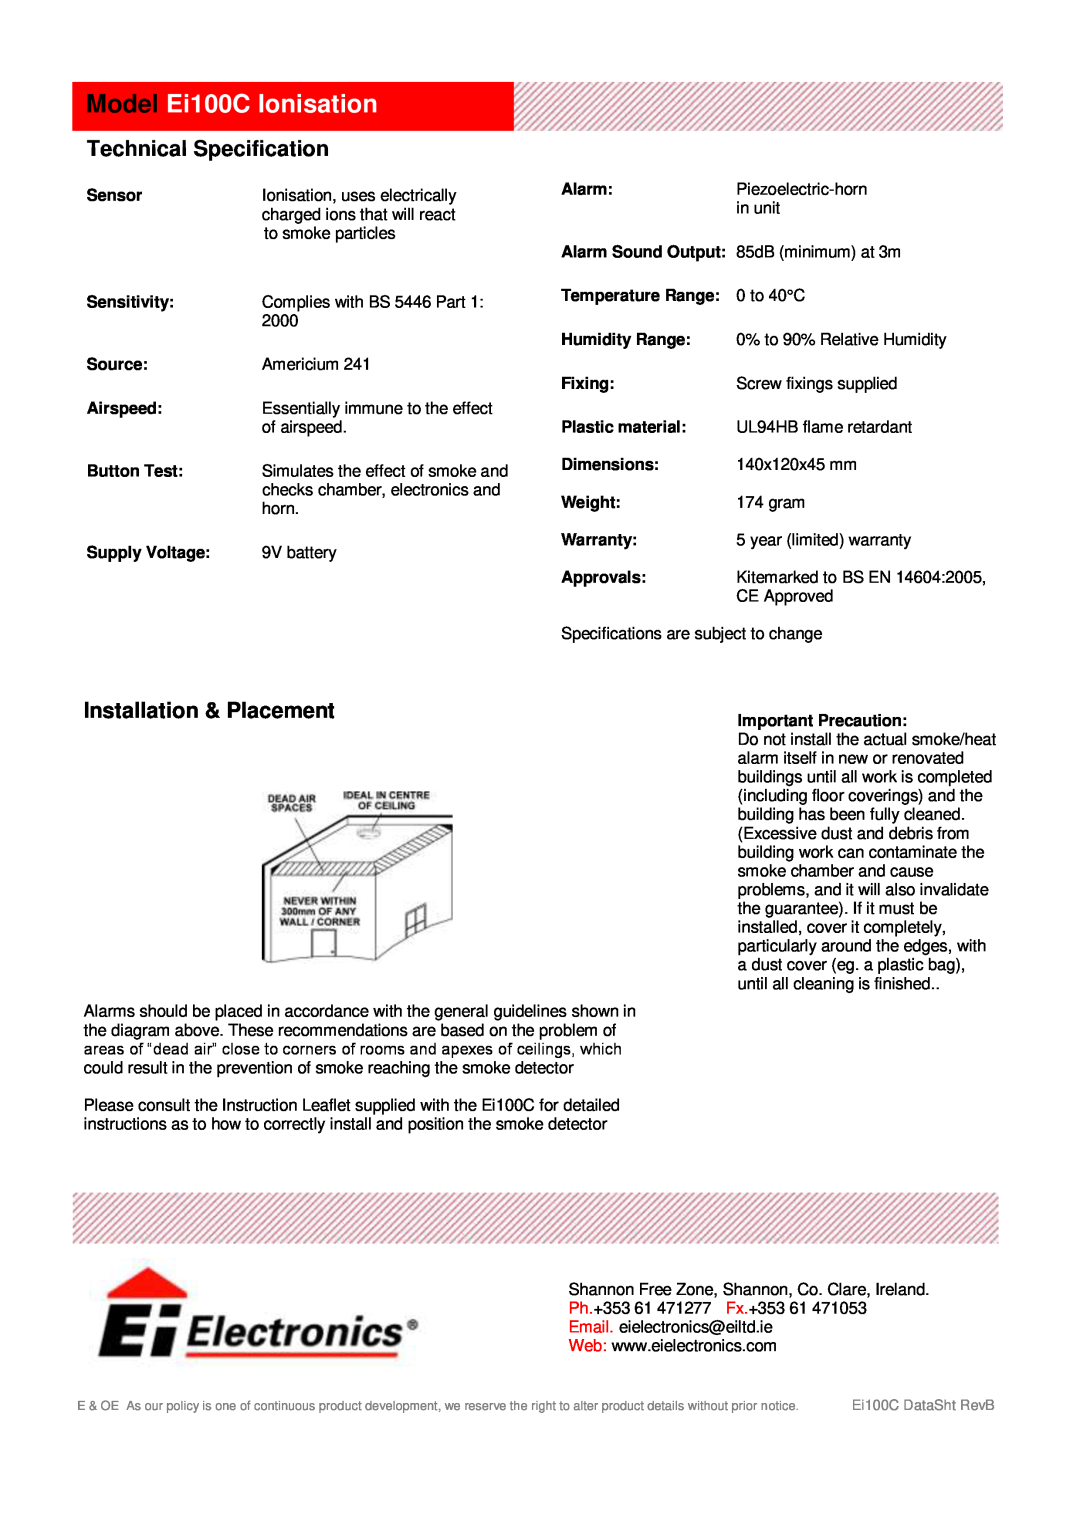 Ei Electronics manual Model Ei100C Ionisation, Technical Specification, Installation & Placement 